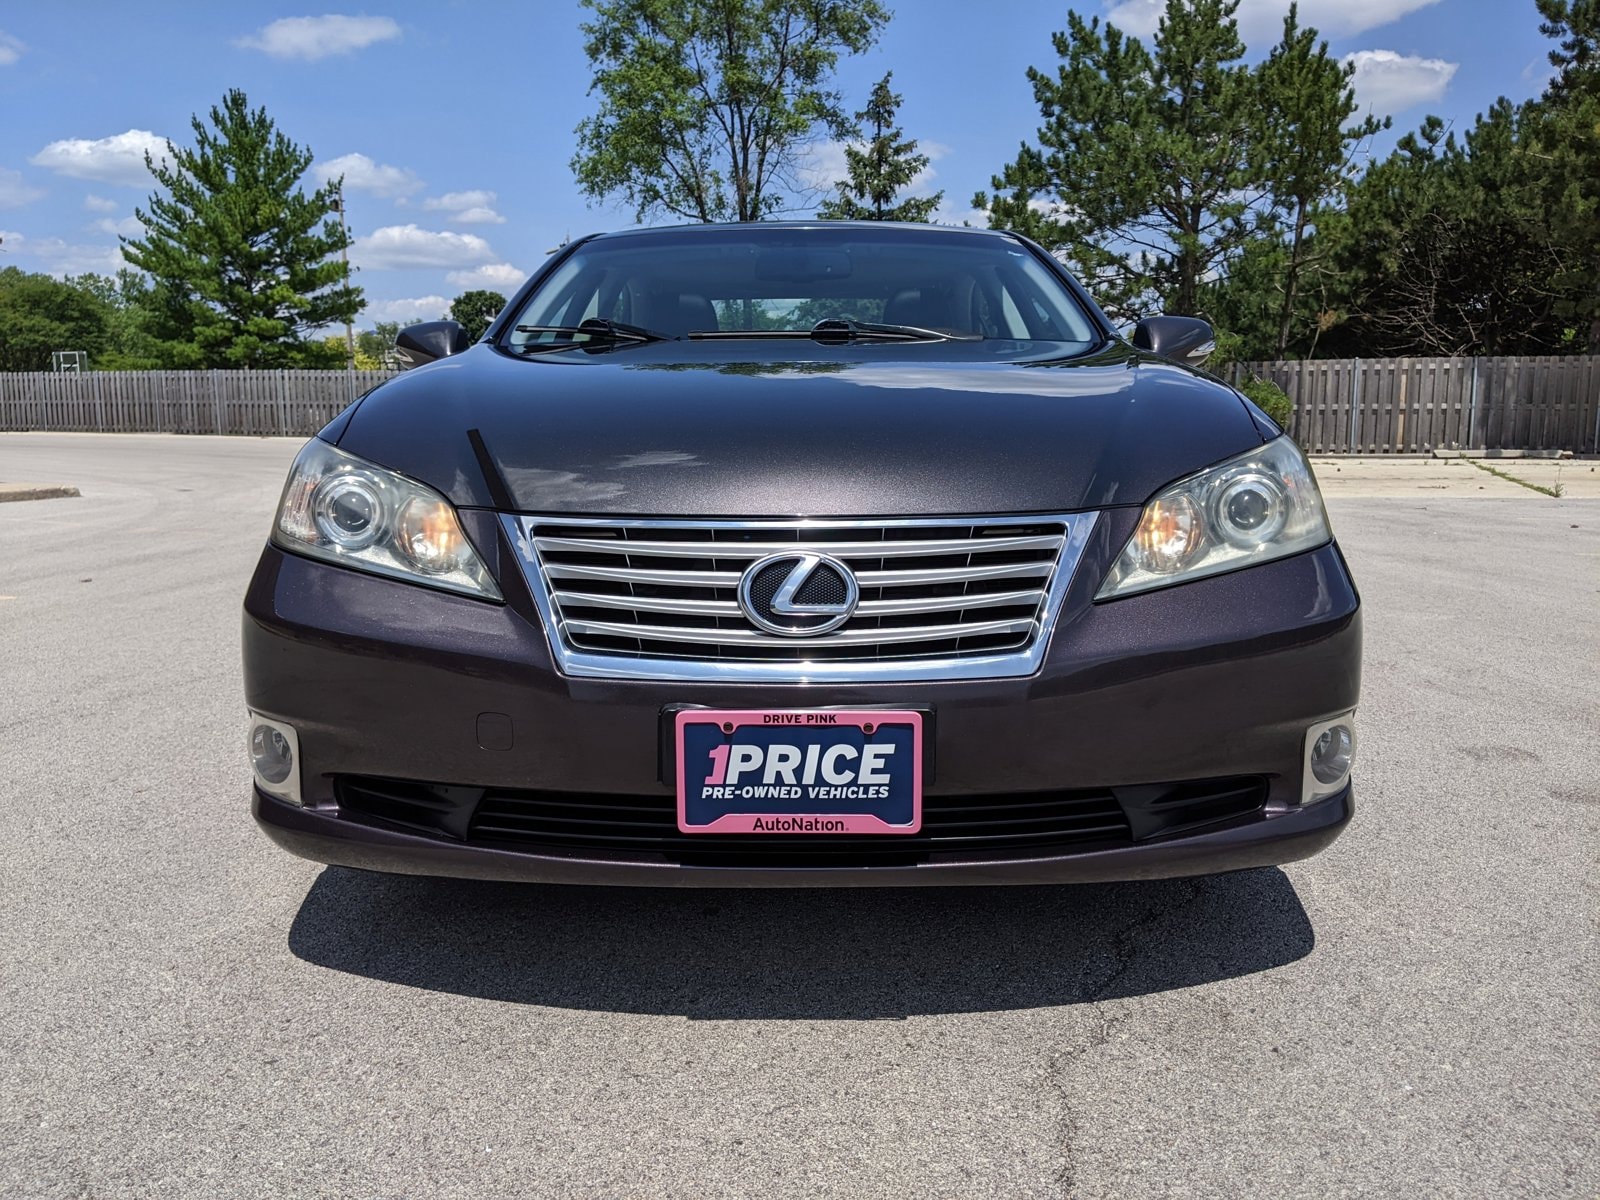 Used 2011 Lexus ES 350 with VIN JTHBK1EG4B2446639 for sale in Des Plaines, IL